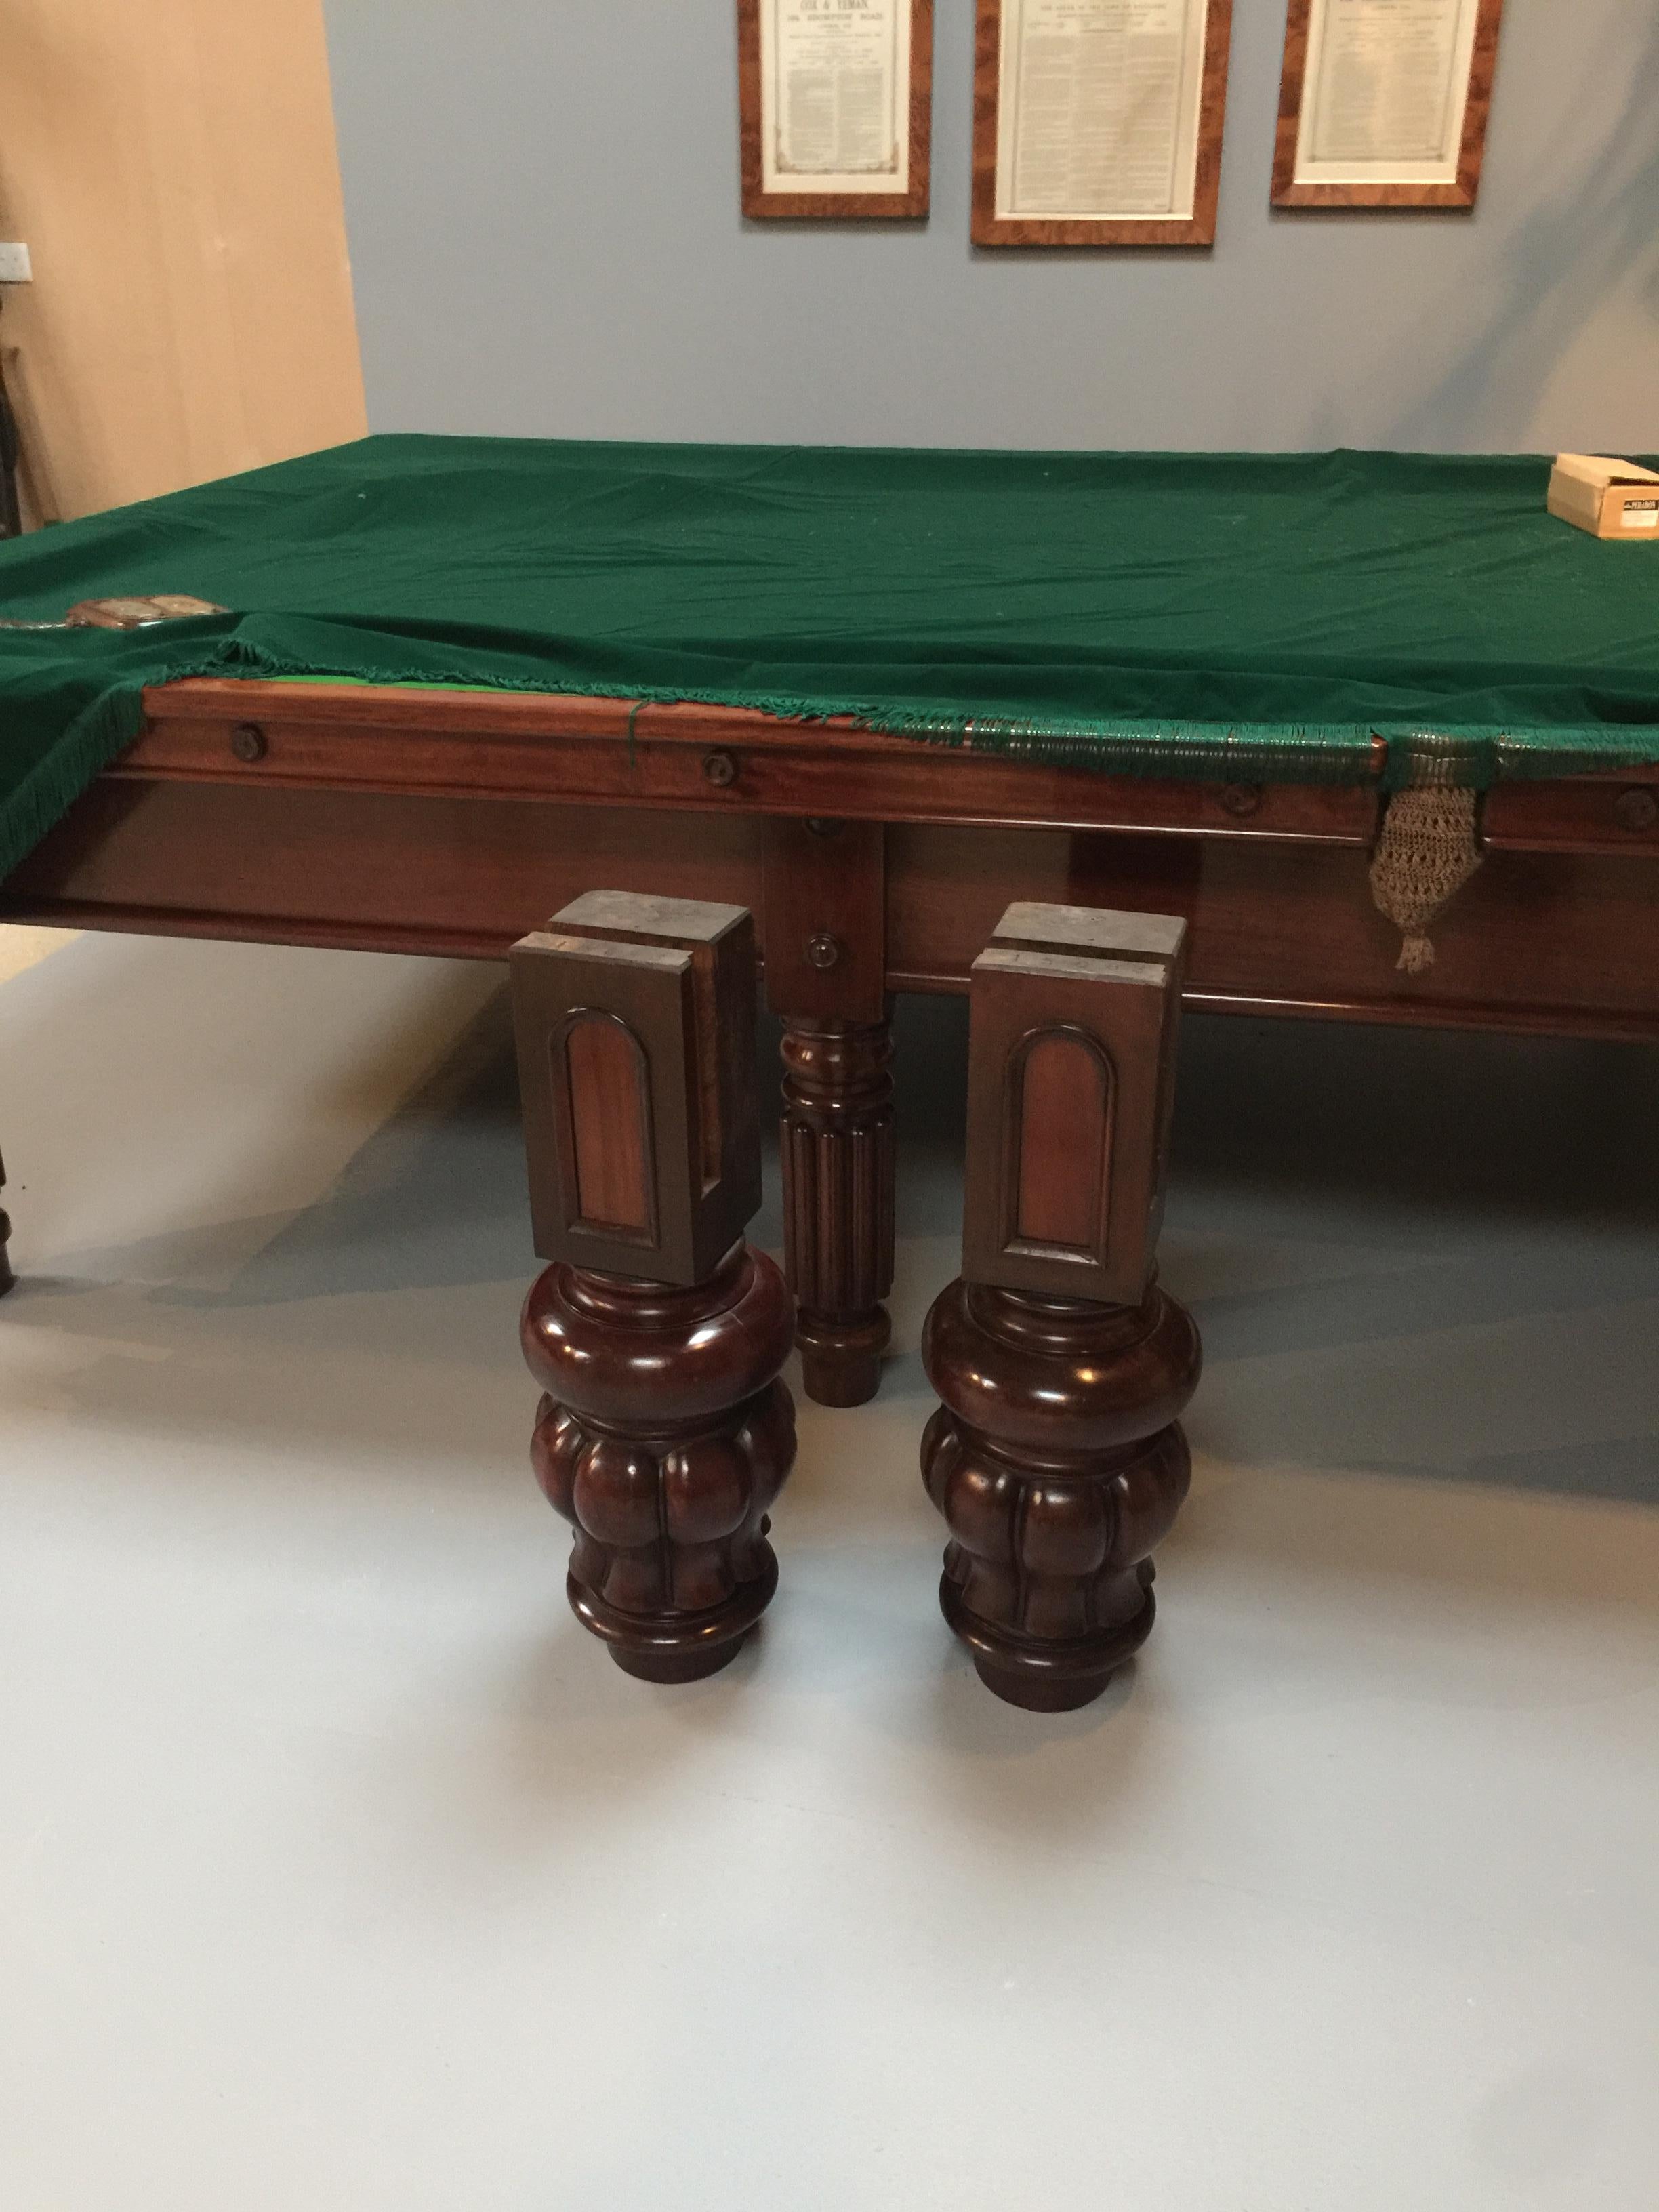 Victorian Billiard Snooker Pool Table Antique, circa 1890 Burroughes and Watts London For Sale